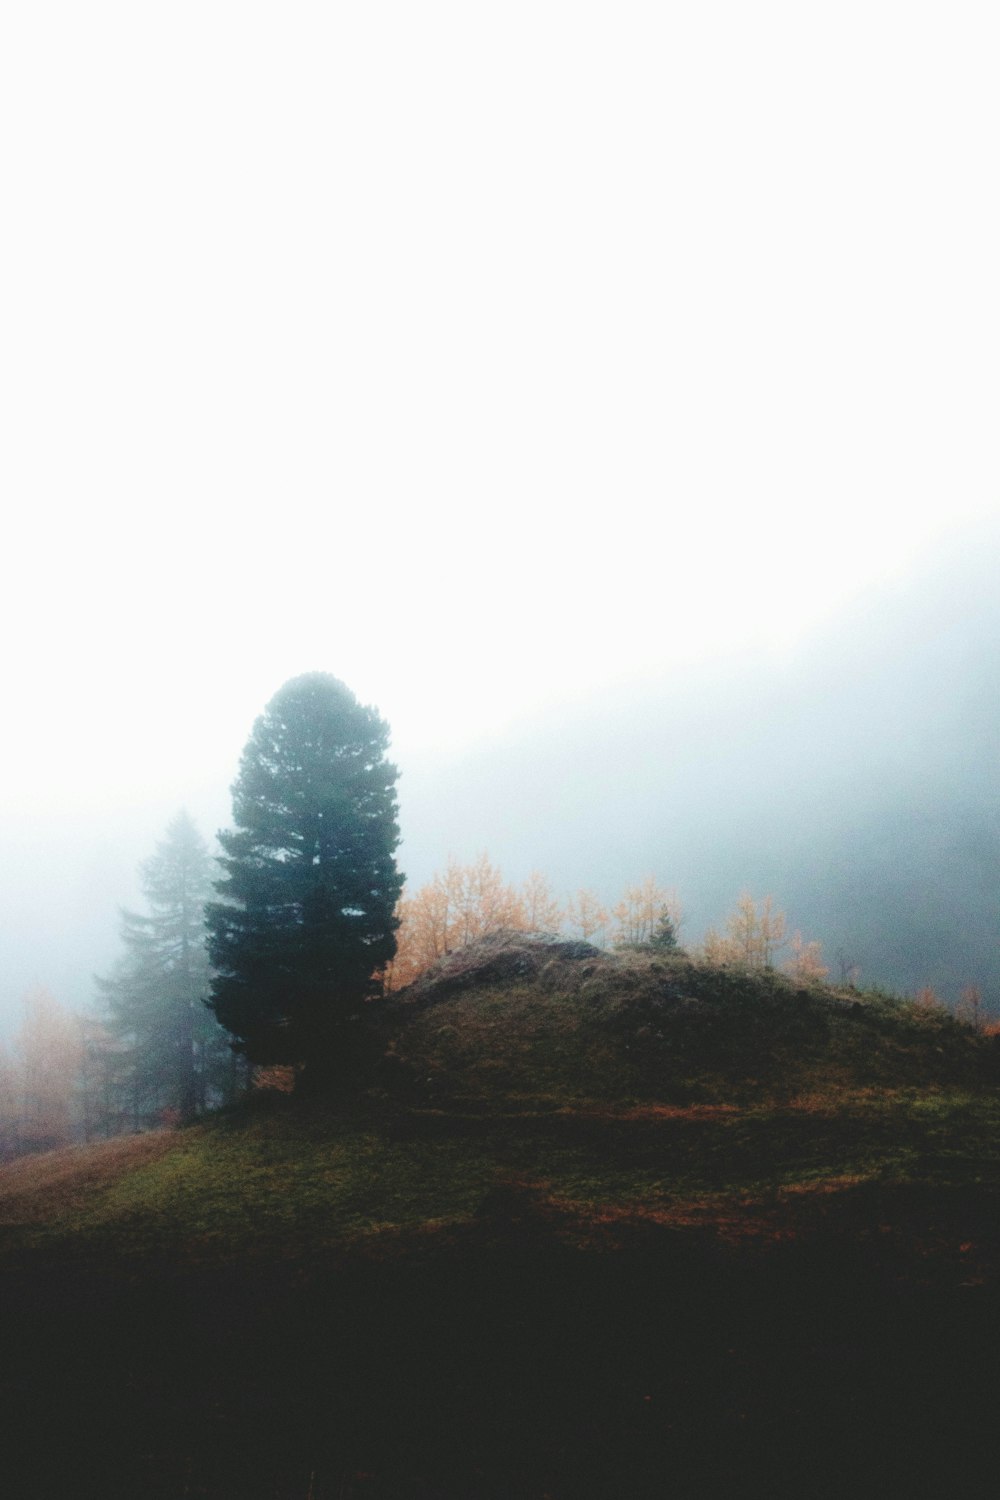 green leafed tree on mountain surrounded by fogs